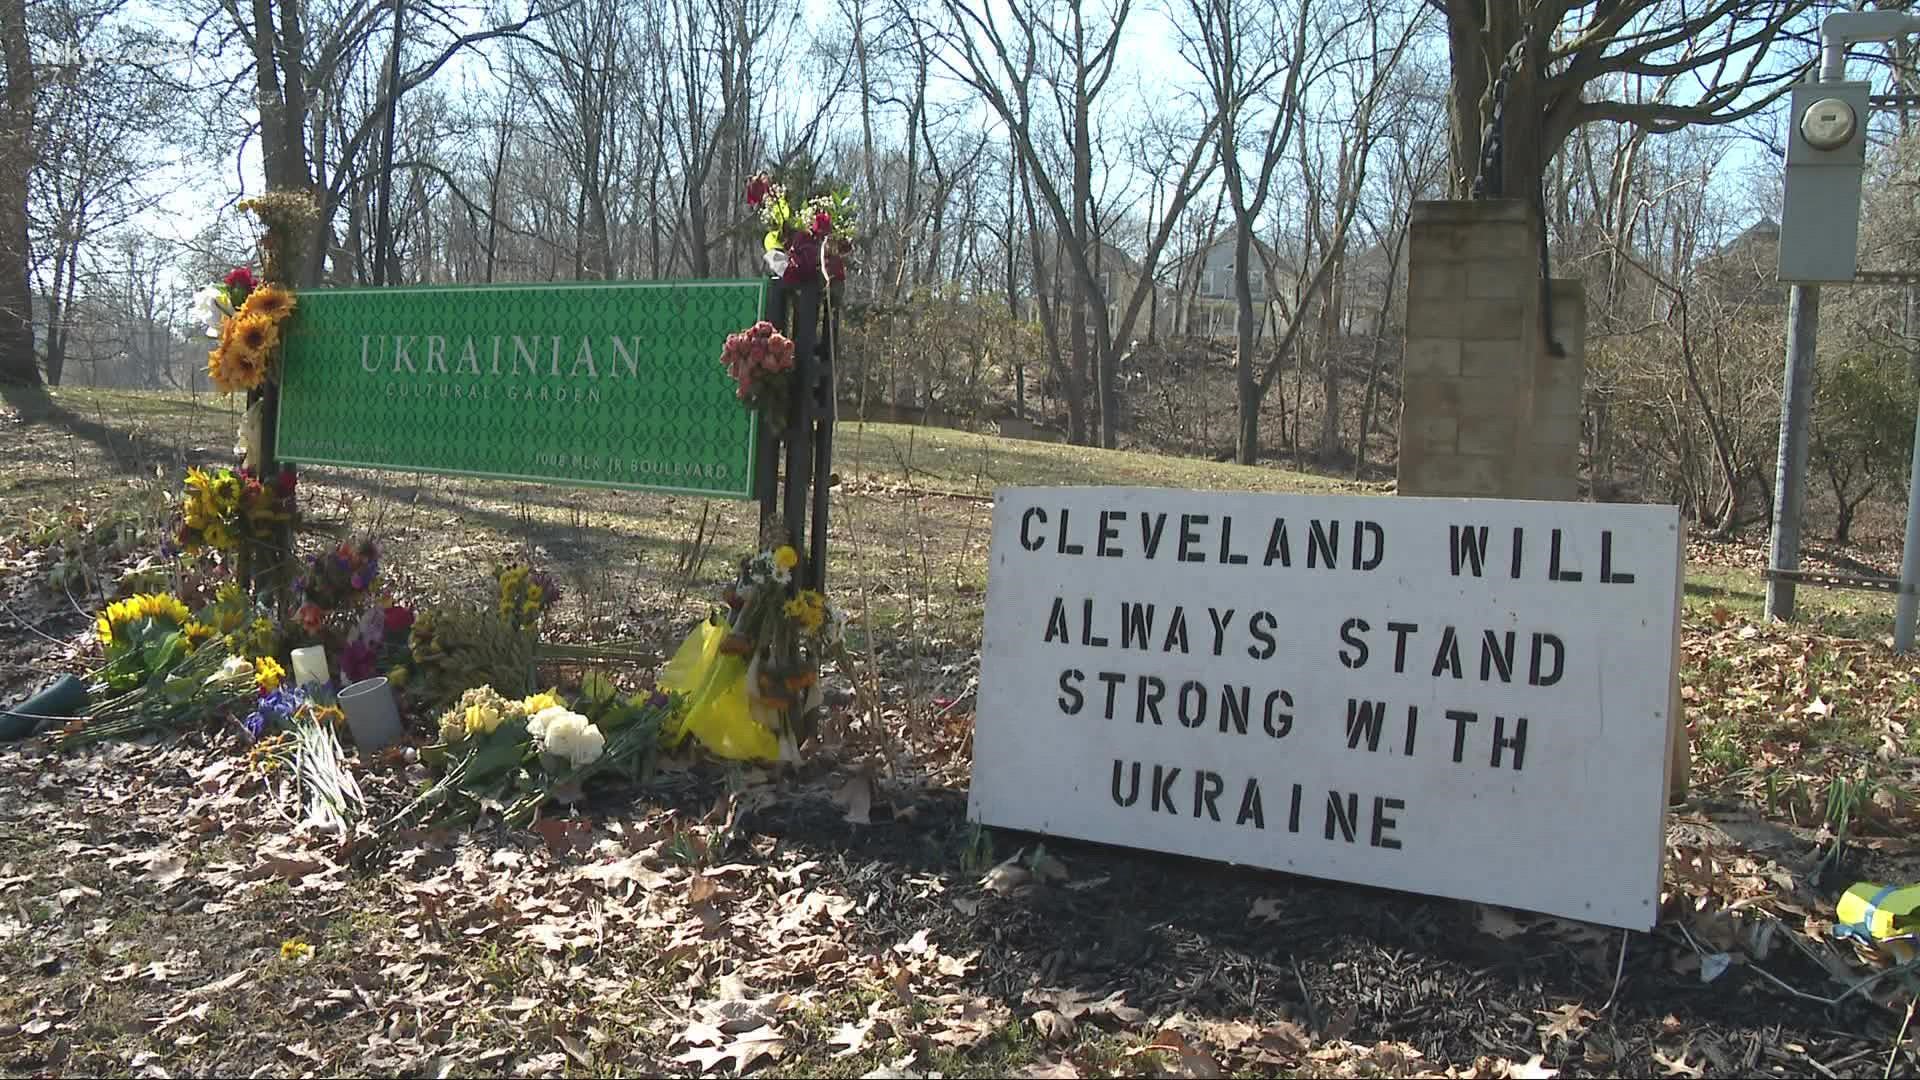 Each of the 33 gardens represents an ethnic community in Greater Cleveland. People of all backgrounds are increasingly drawn to the Ukrainian space.